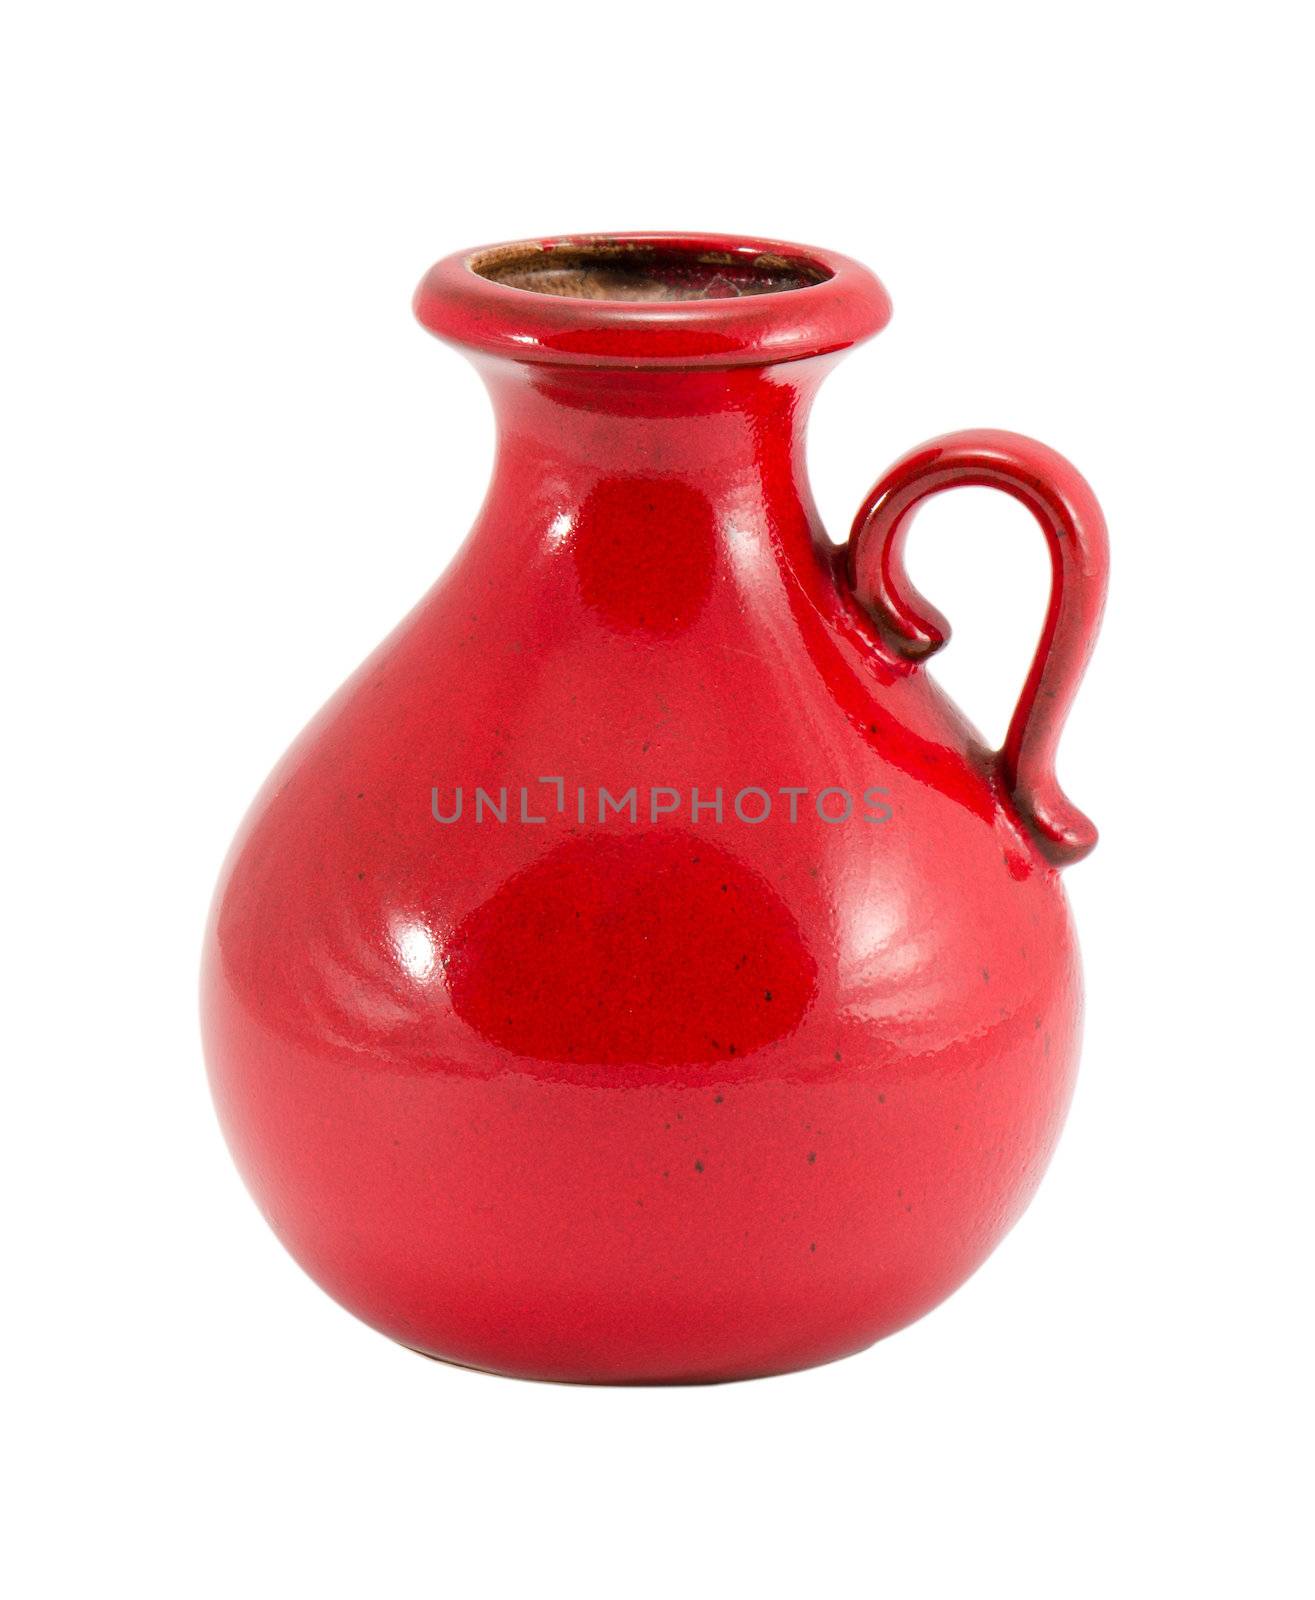 red retro ceramic round flower vase with handle and small hole isolated on white background.